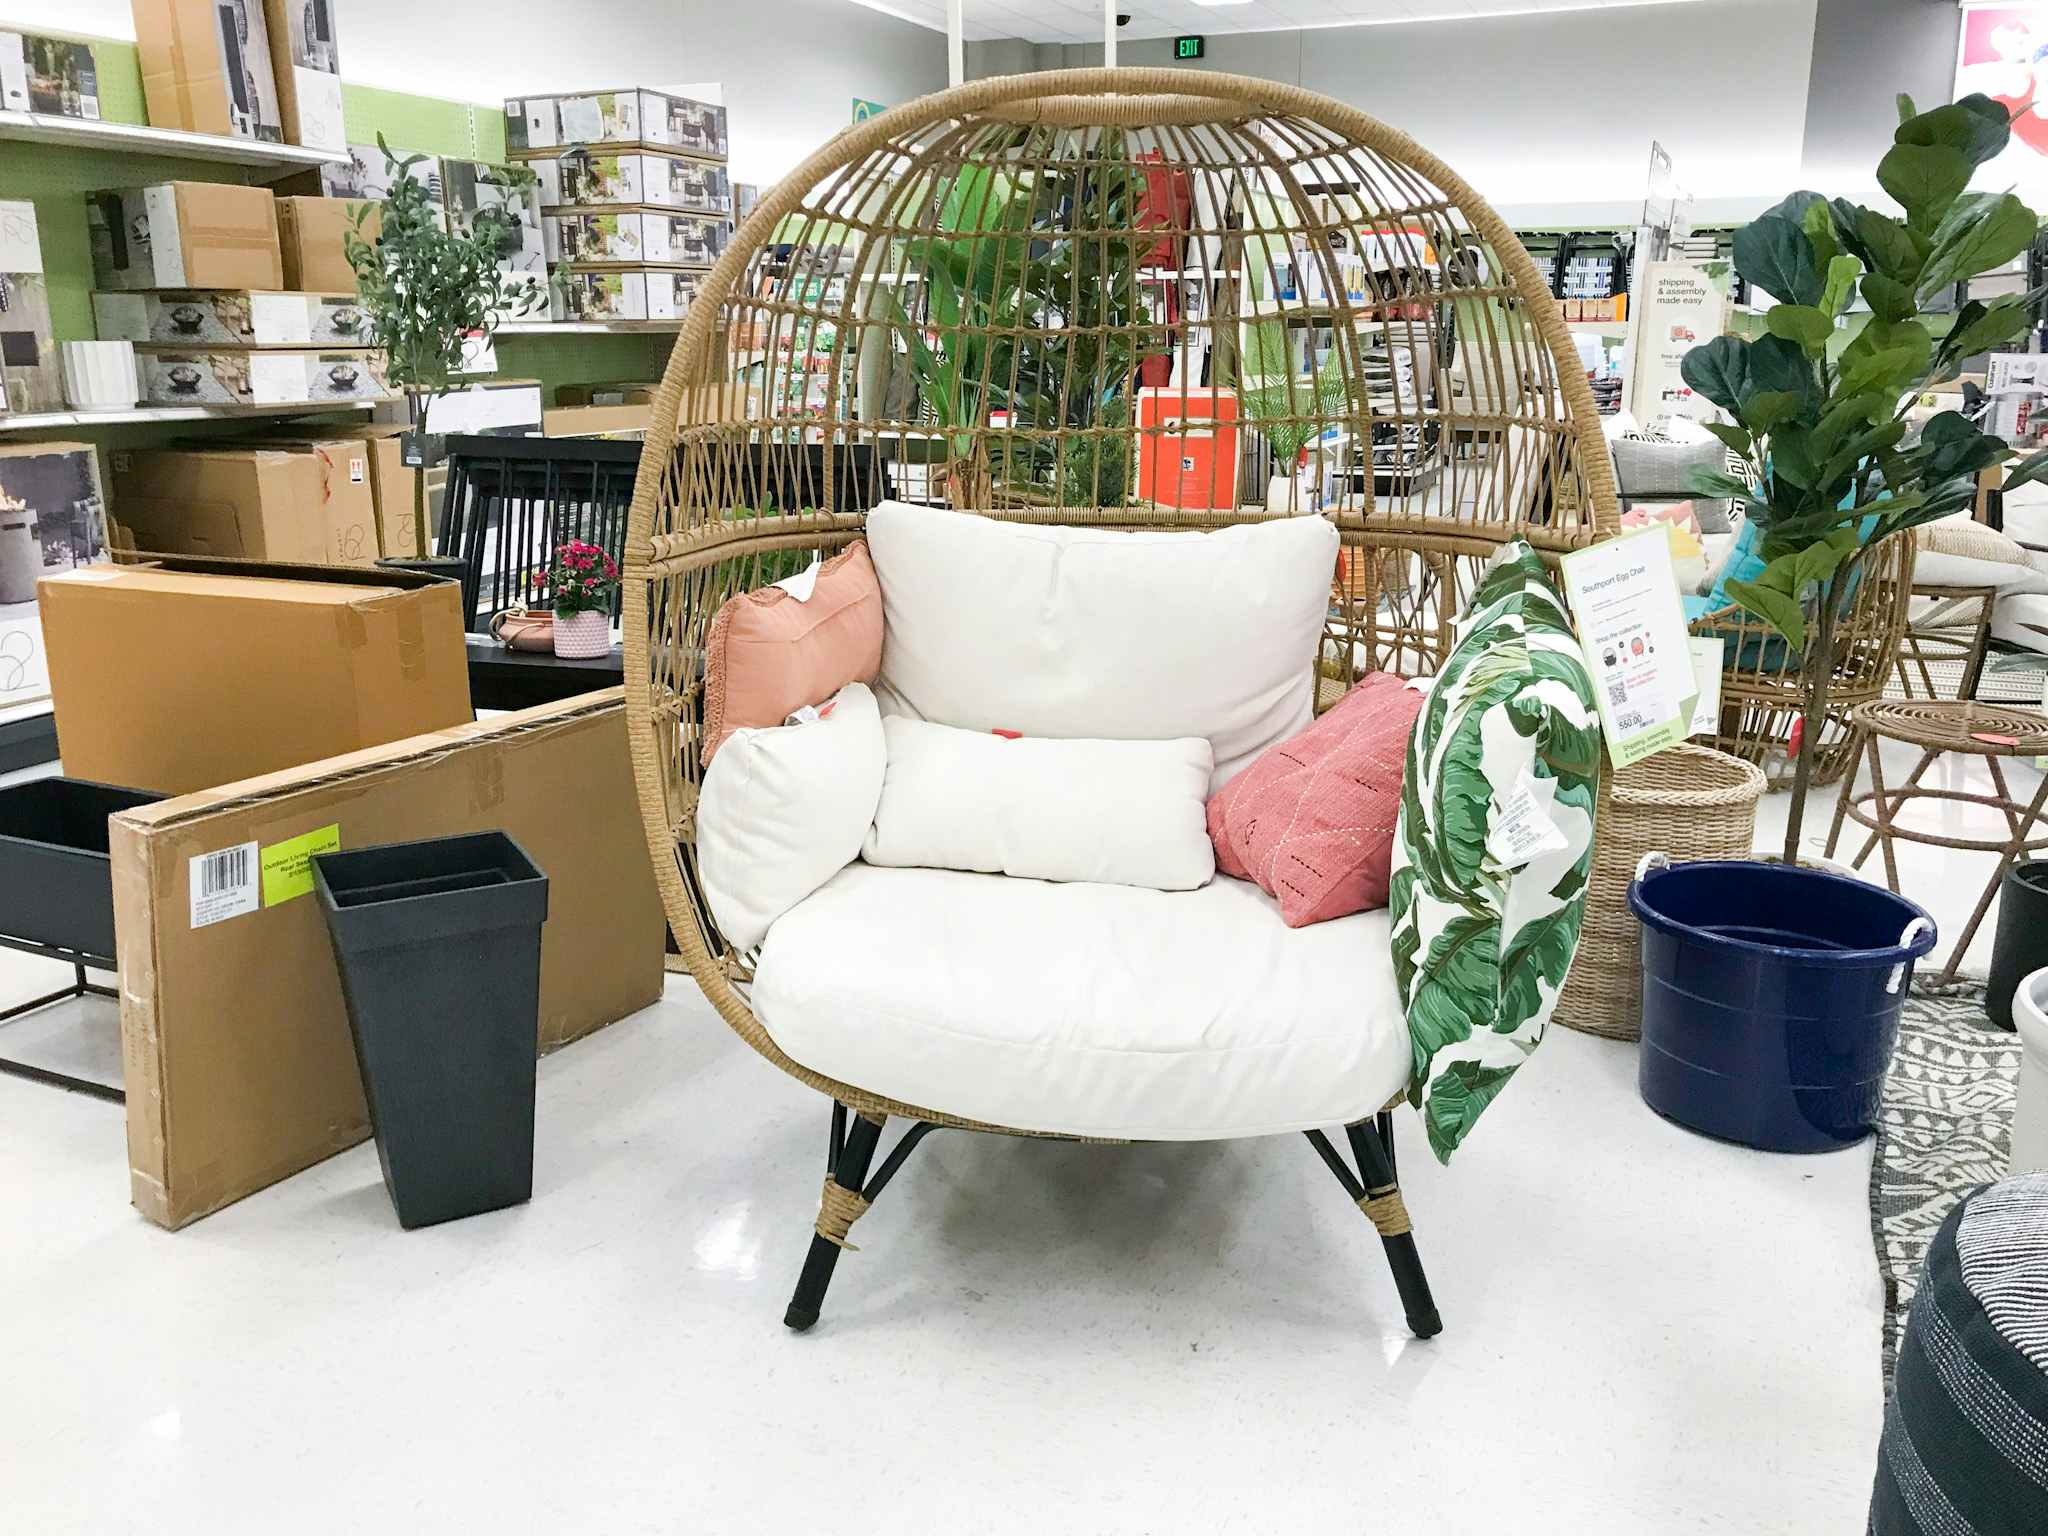 Patio Furniture Sale at Target — Prices Start at Just $67